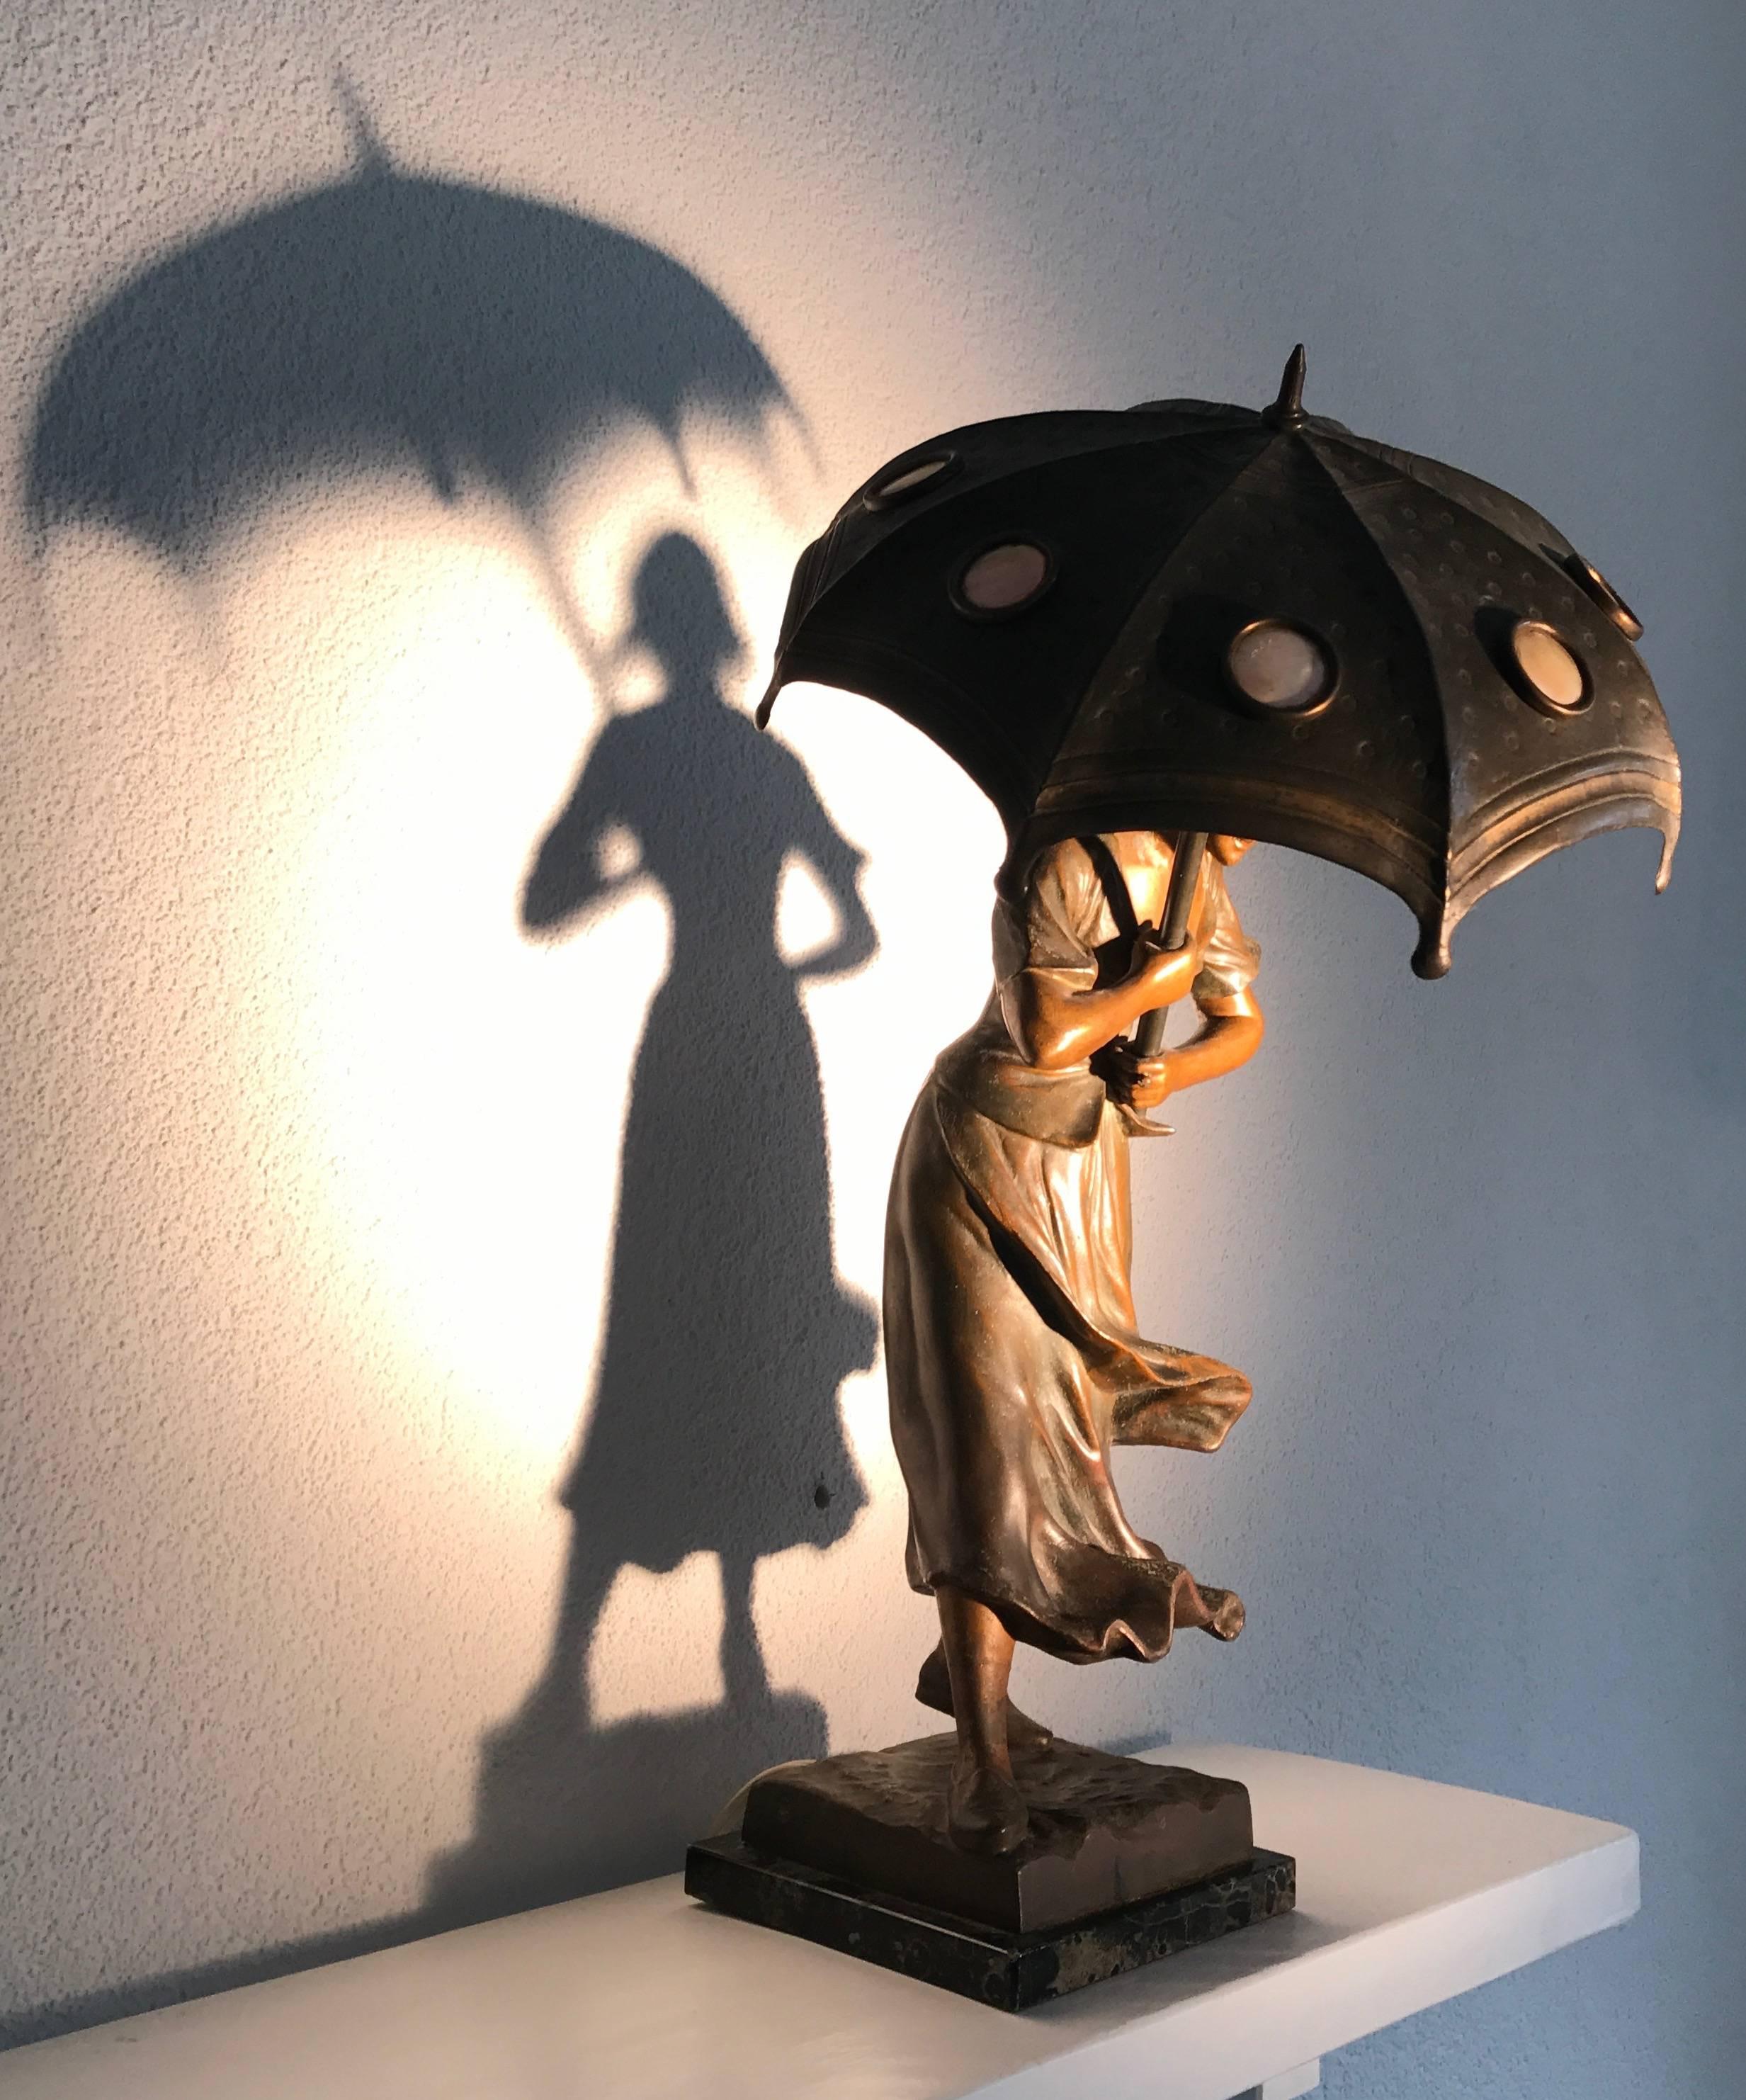 German Stunning Art Deco Sculpture Desk or Table Lamp, Girl with Umbrella in the Wind